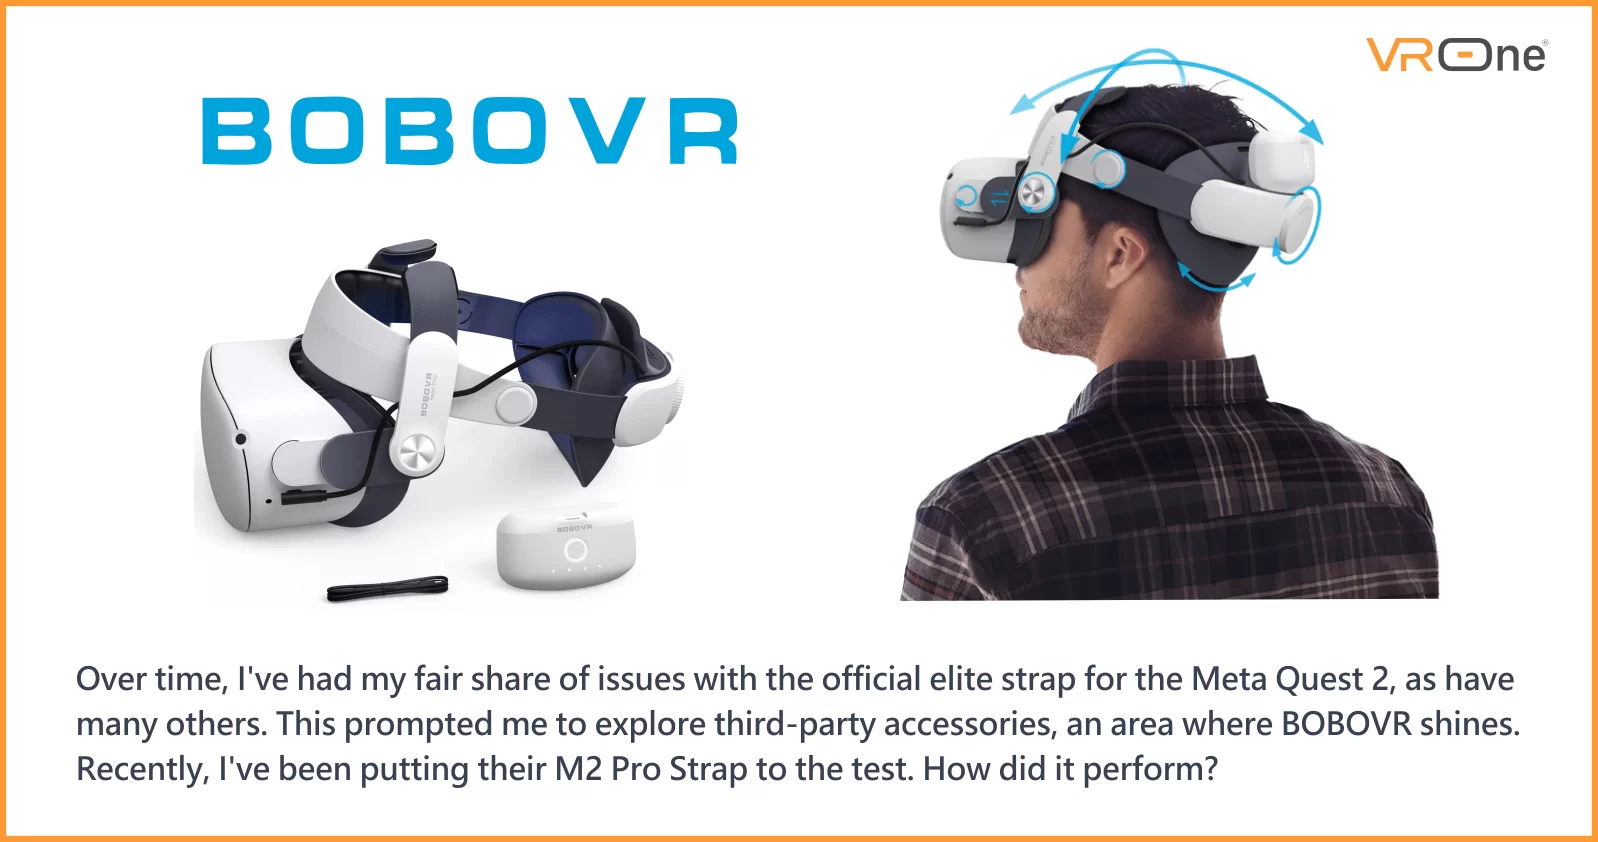 Just tried out the Bobovr halo m3 pro strap. (I don't want any